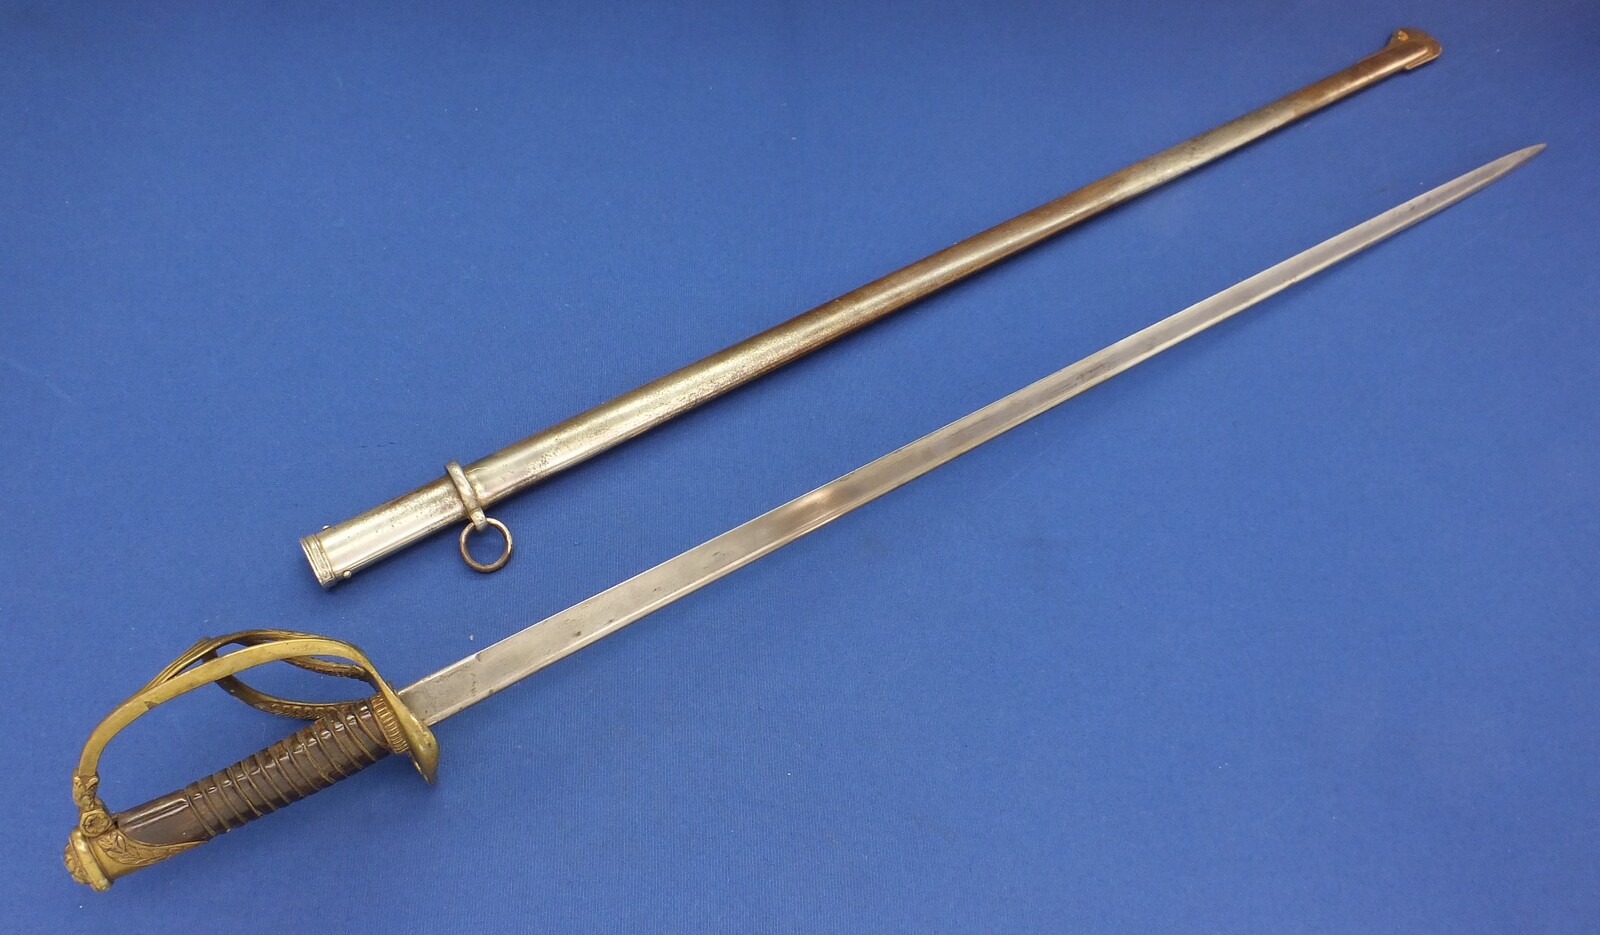 A very nice antique Belgian Officers Sword Model 1889, total length 106 cm, in very good condition. Price 425 euro